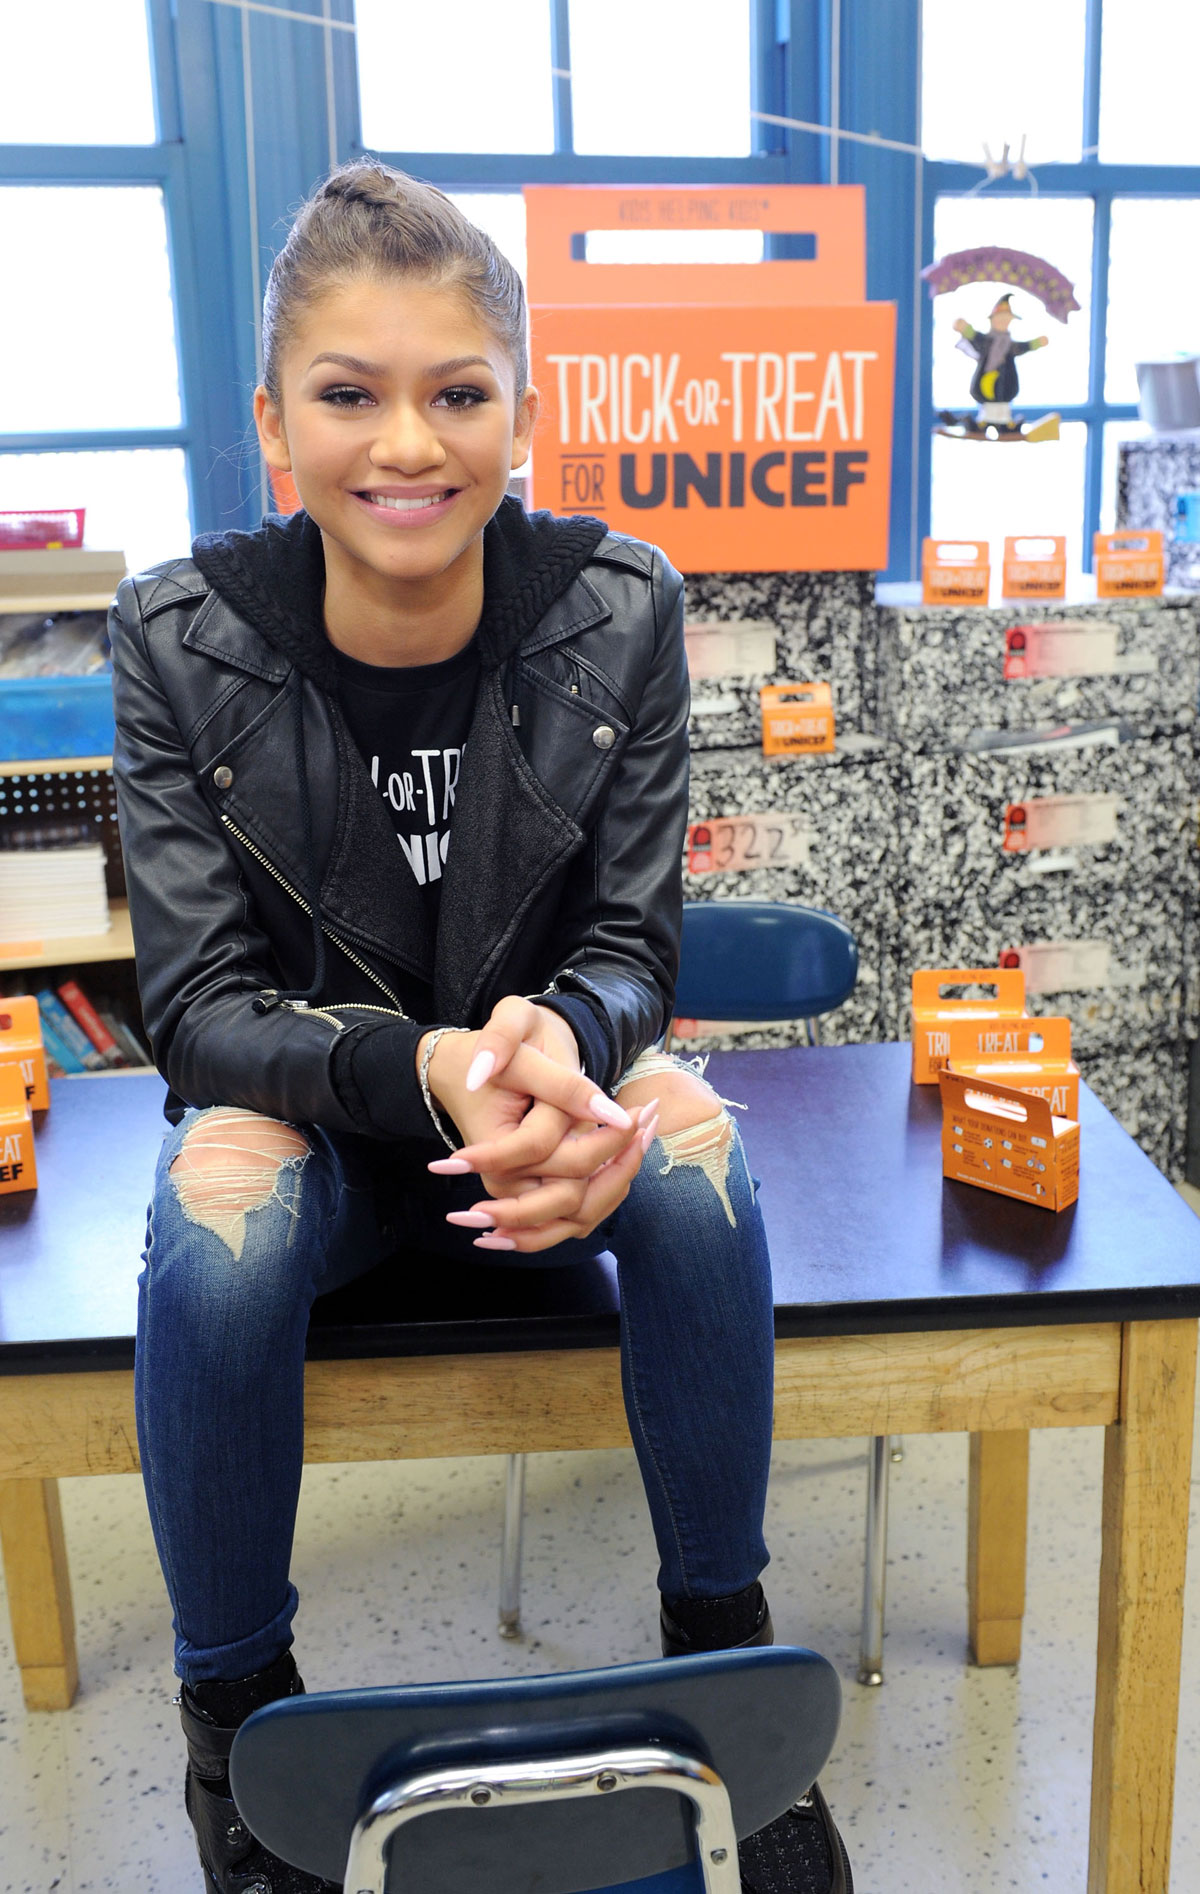 Zendaya Coleman attends Trick-or-Treat for UNICEF